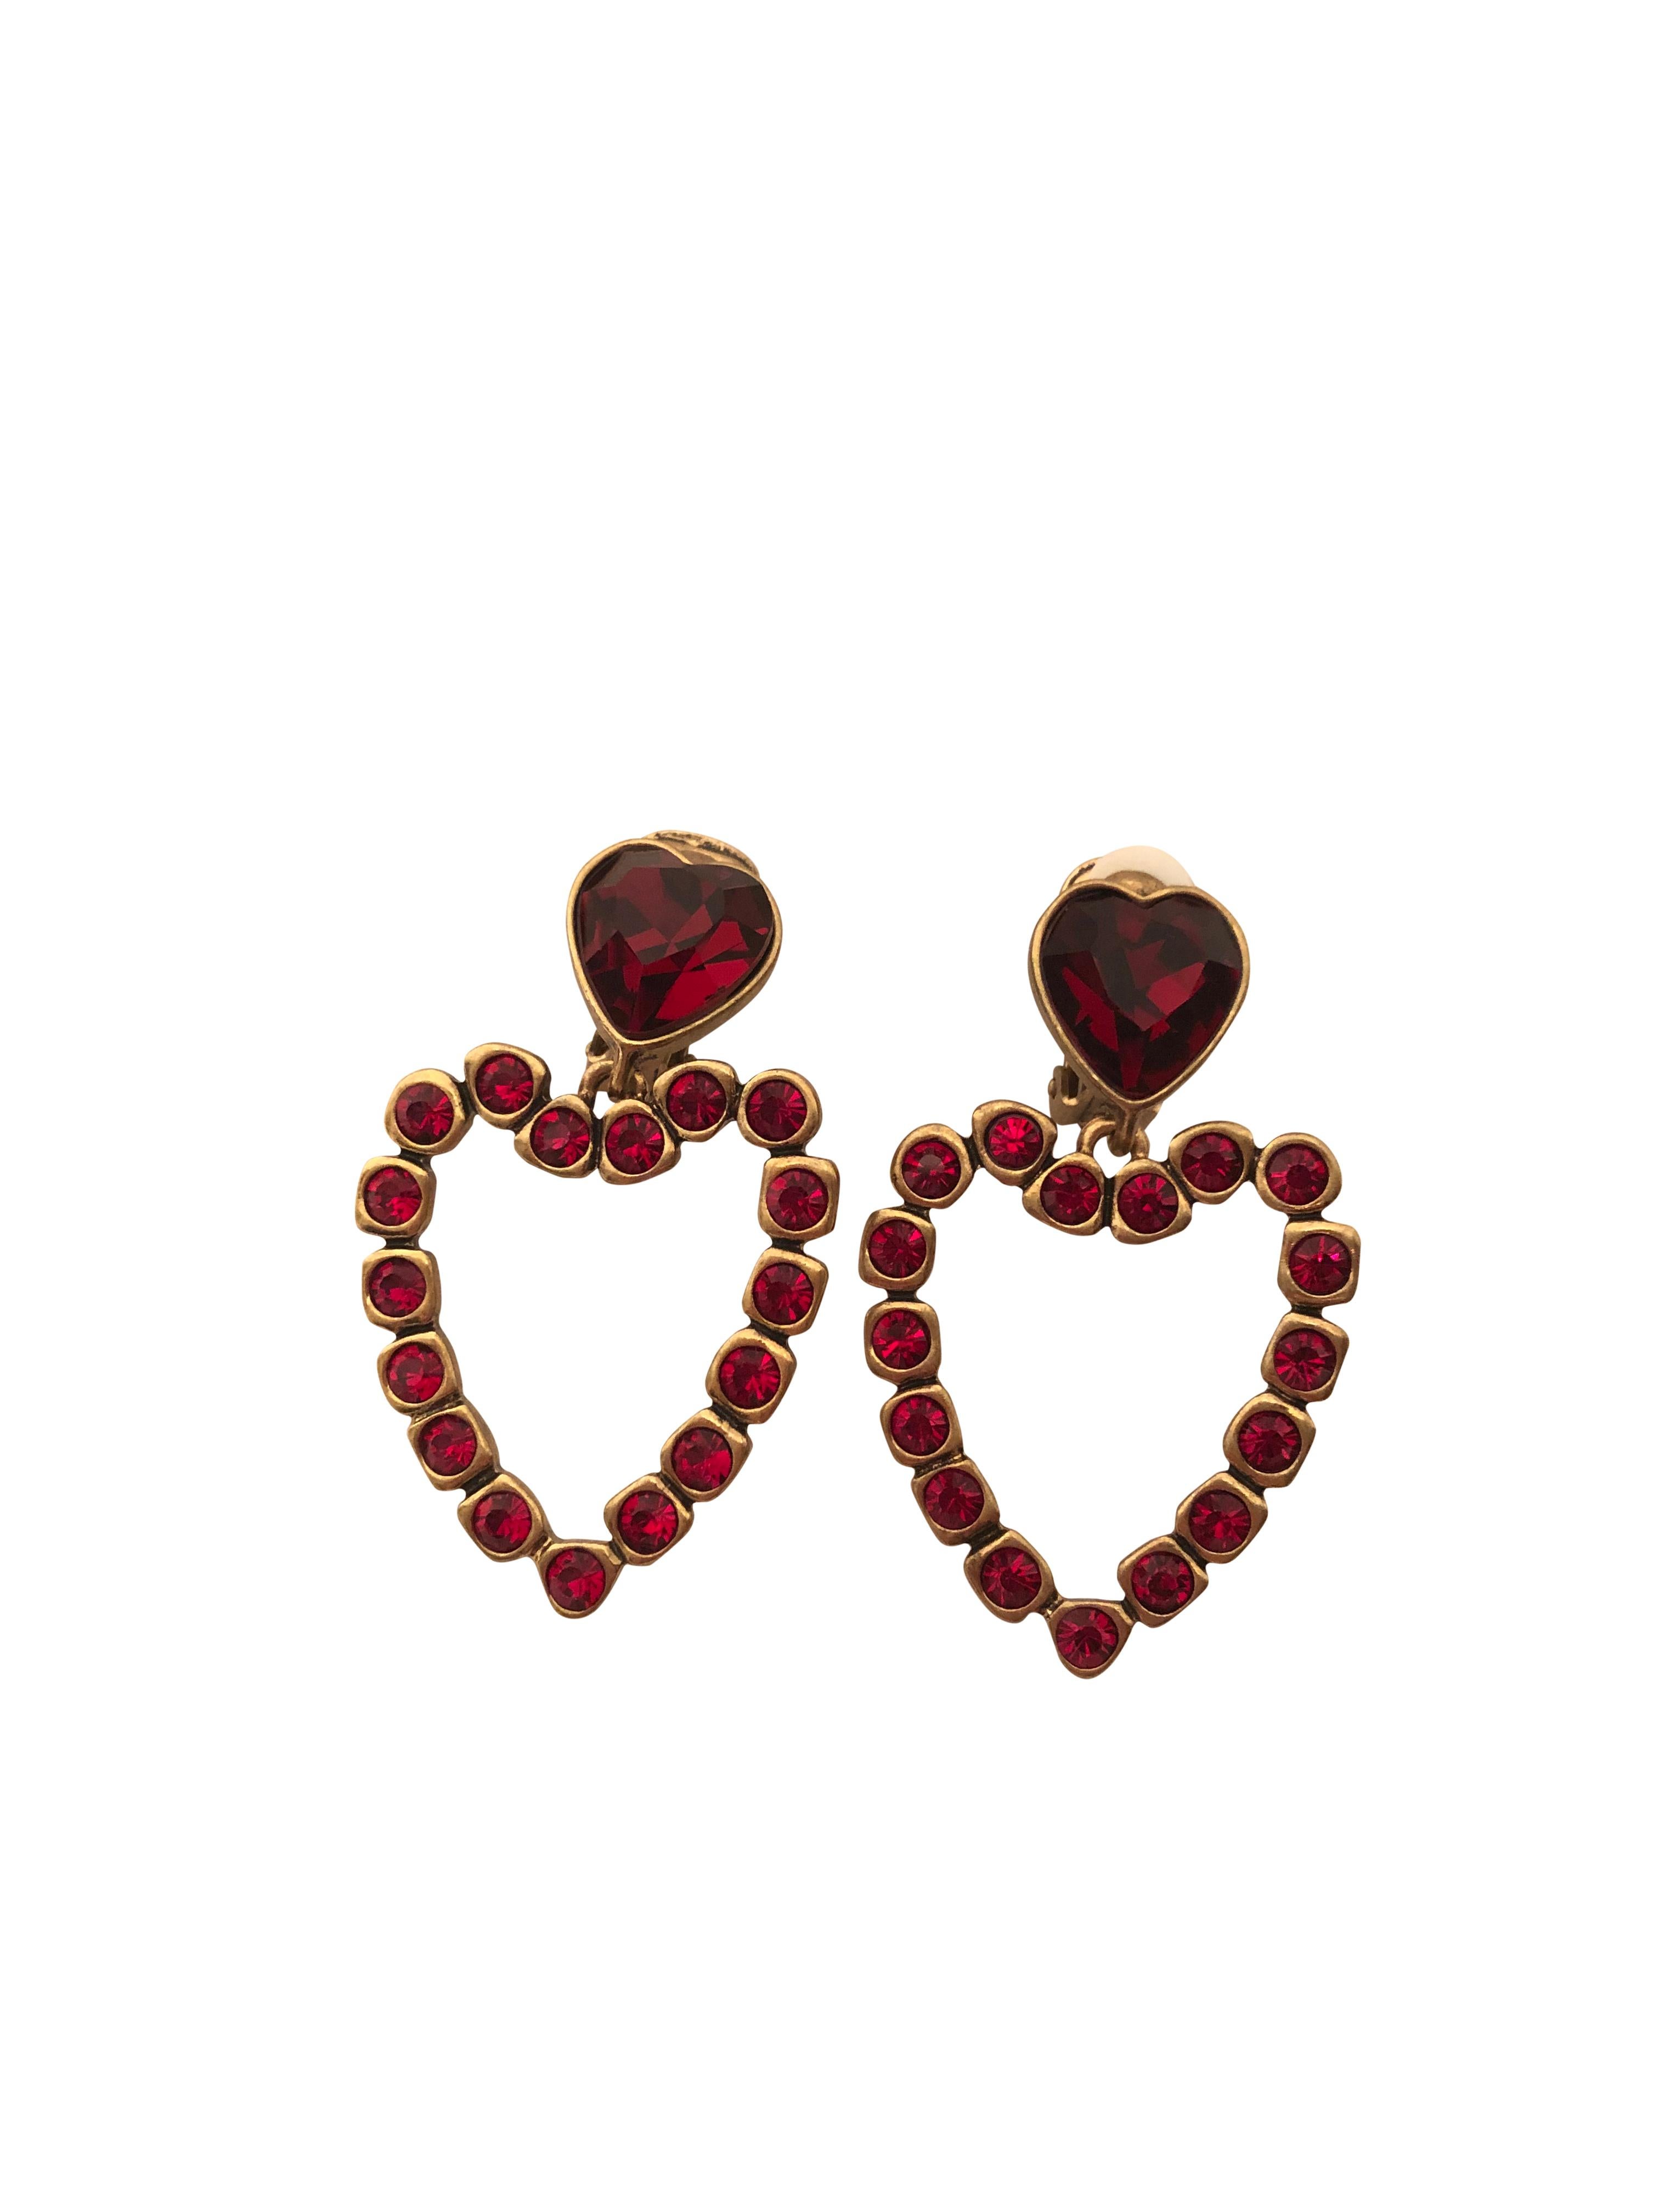 Stunning Oscar de la Renta love heart drop earrings with ruby red diamantes set in gold toned hardware. Clip on closure. Made in USA.

